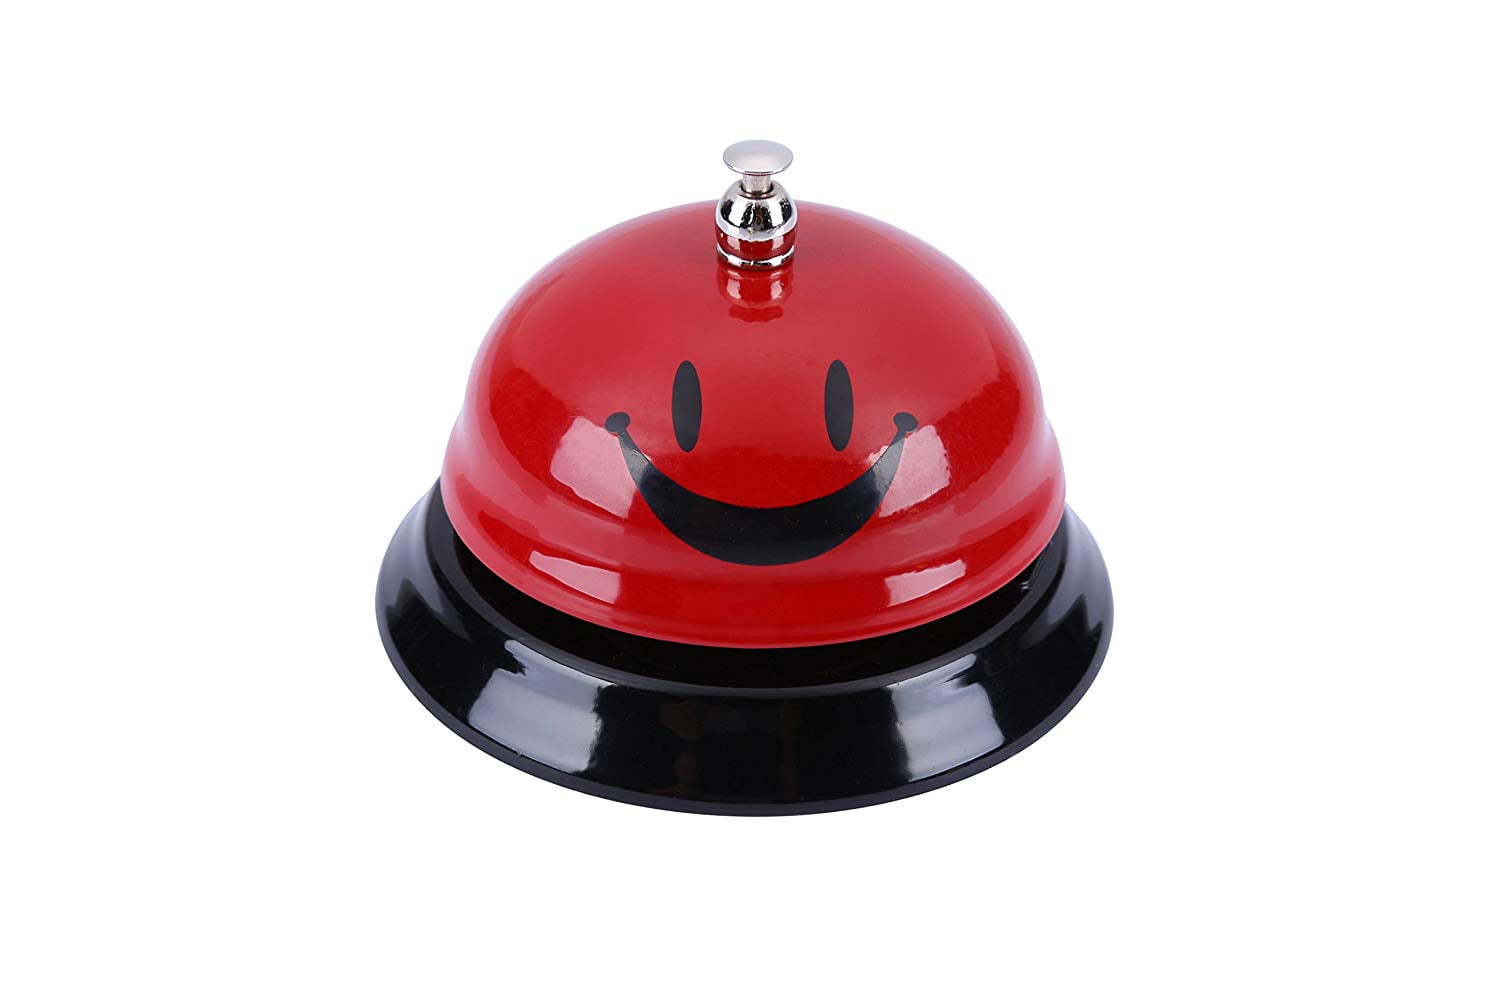 Classroom School 2 Short+Tall Bell, 3 Restaurants Kitchen Party Decor&crafts 3PCS Office Desk Call Bells Cute Smiley Service Bell Party Game Ring Bell for Hotel 